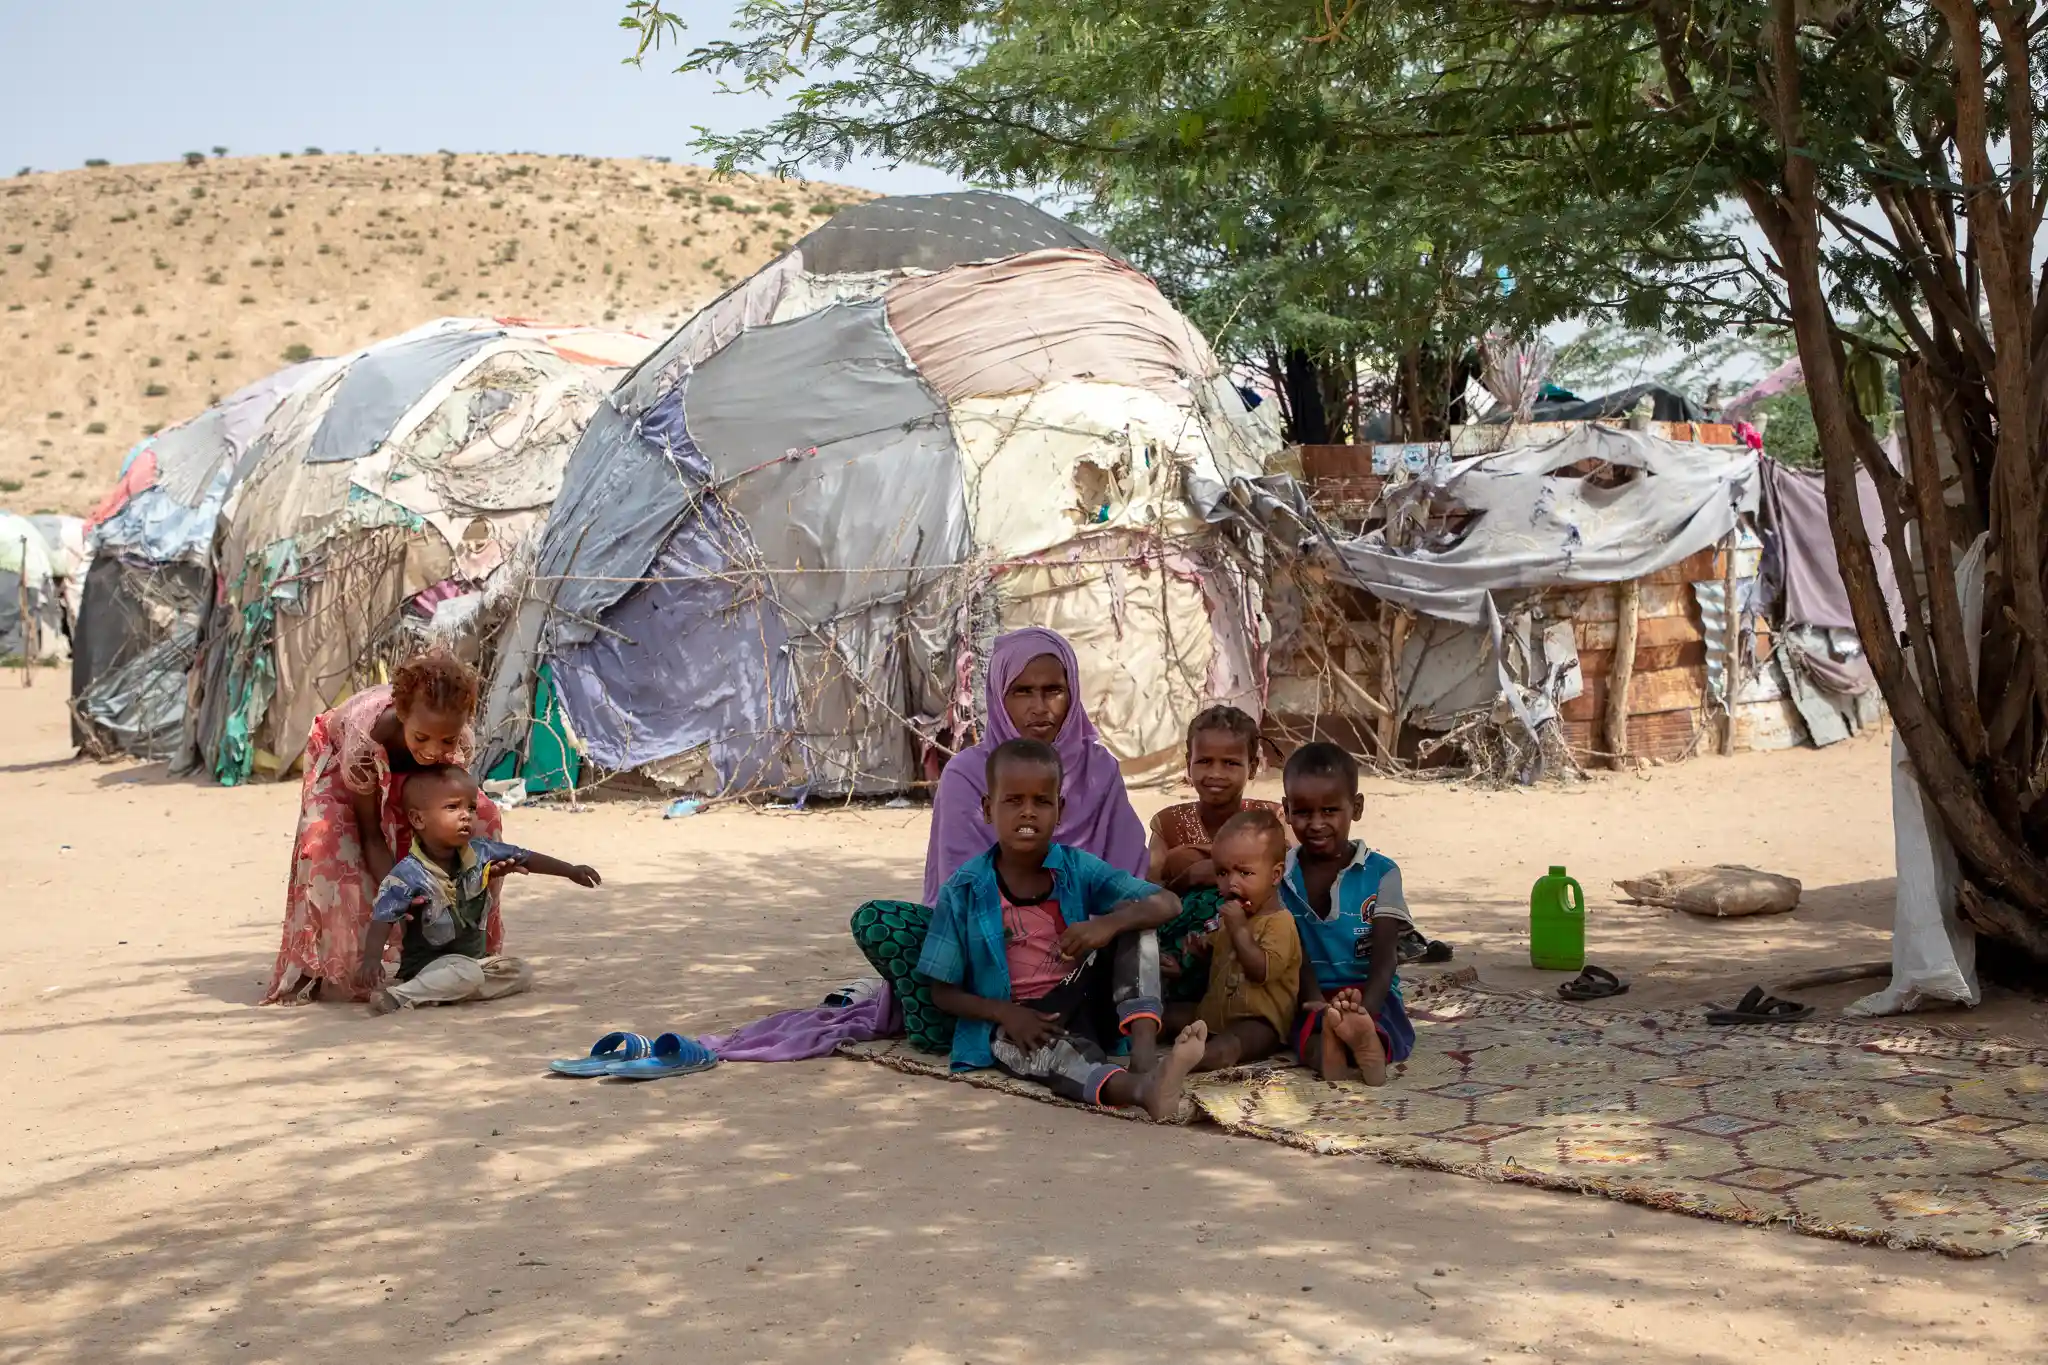 In the IDP camp of M.Mooge, Somaliland, Amina Ahmed Hashi lives with her 4 children.